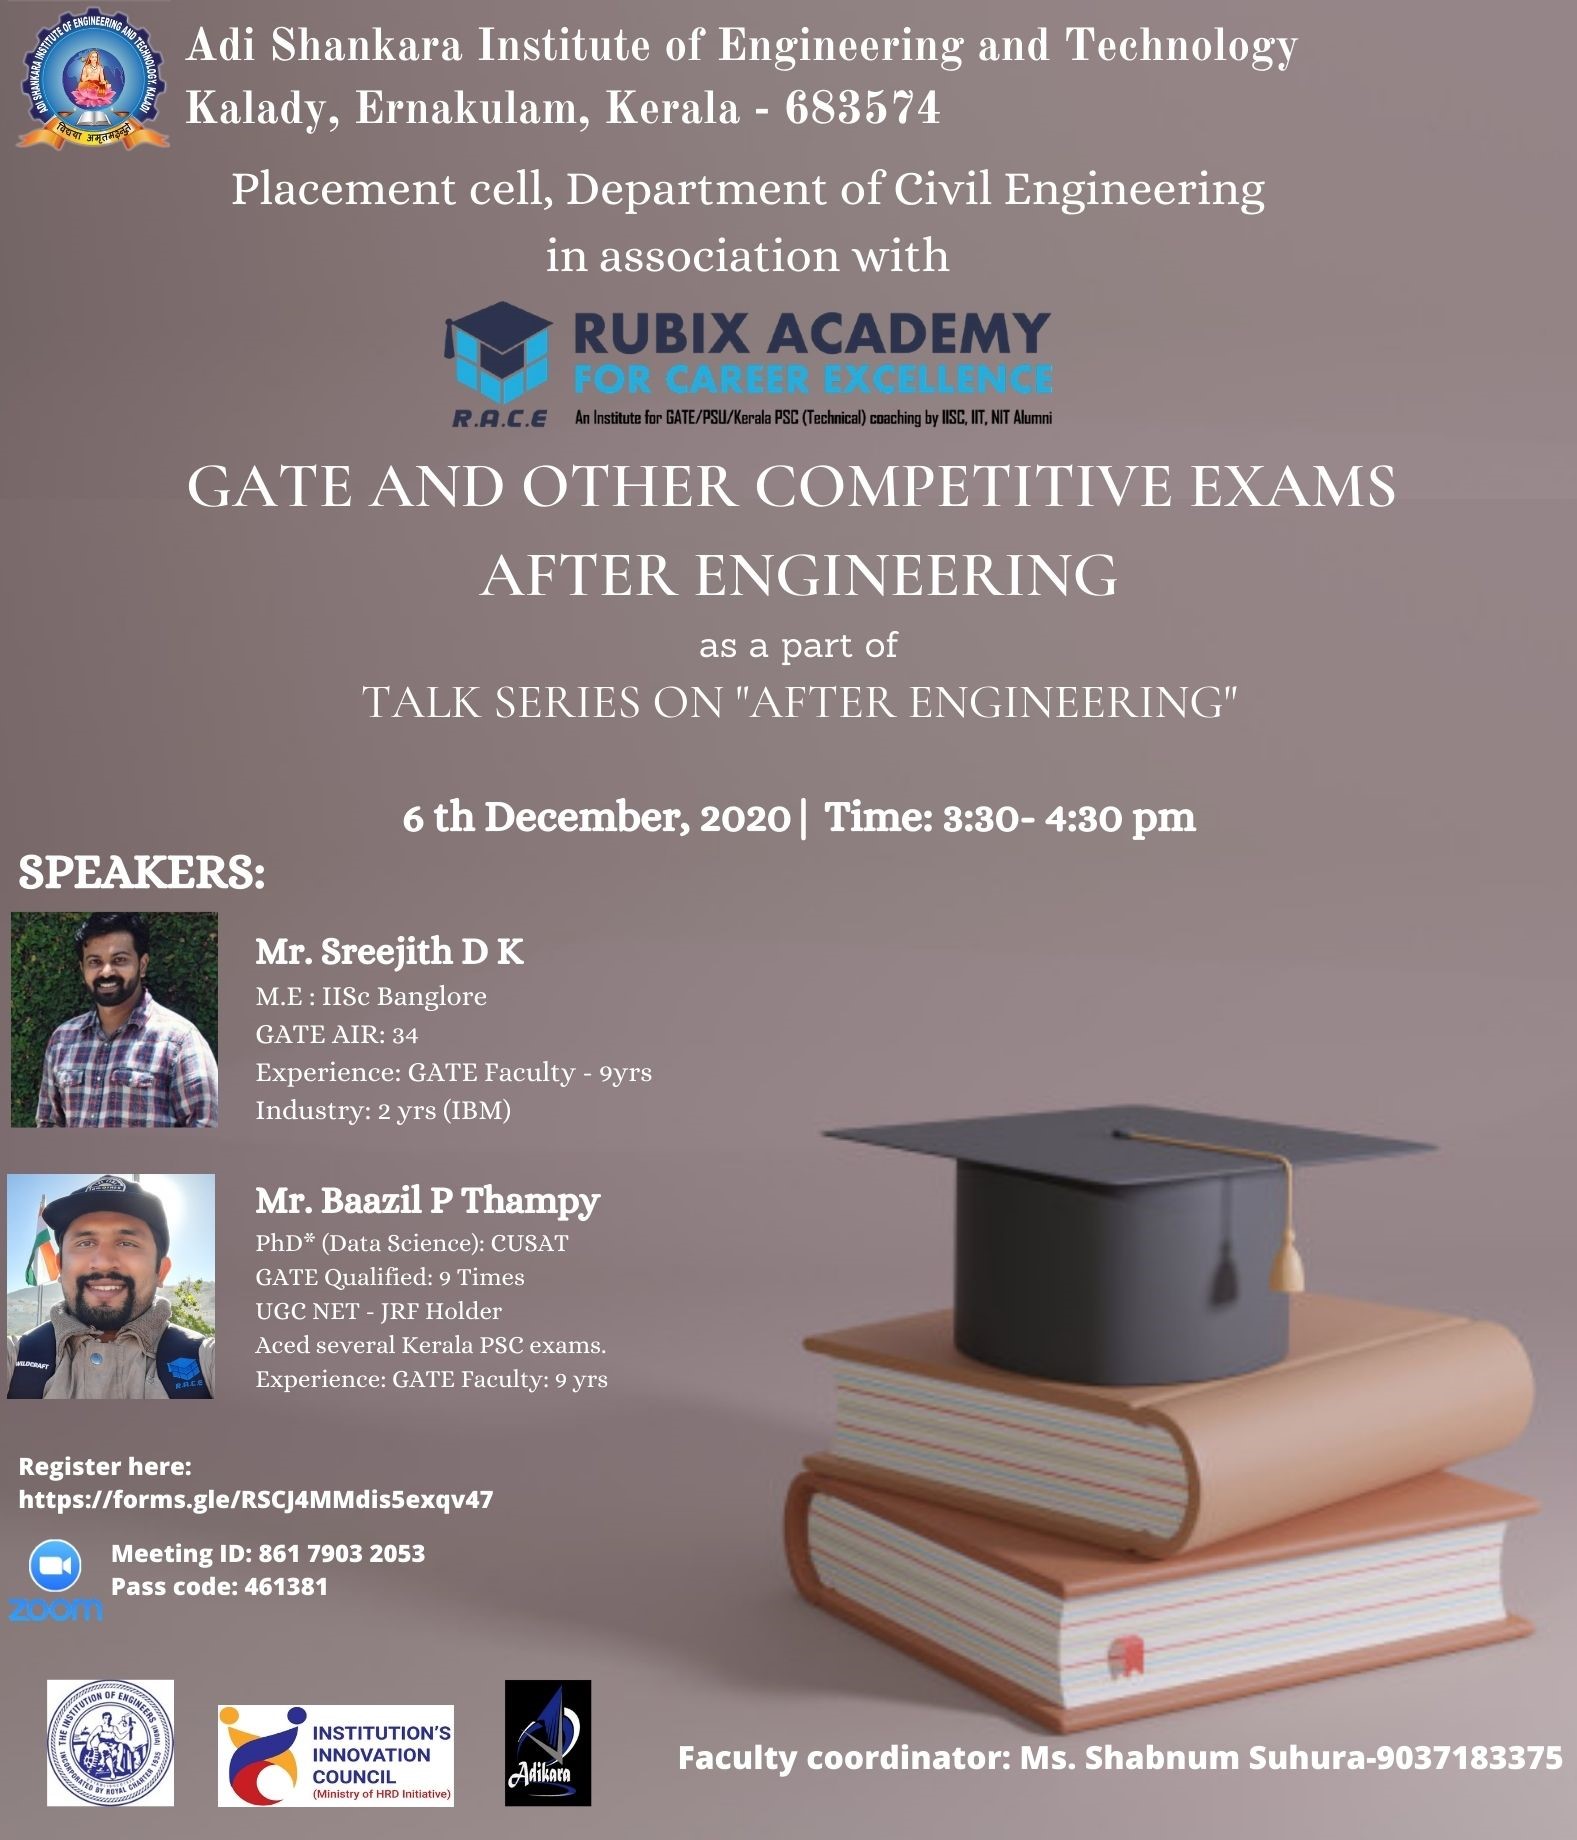 TALK ON GATE AND OTHER COMPETITIVE EXAMS AFTER ENGINEERING